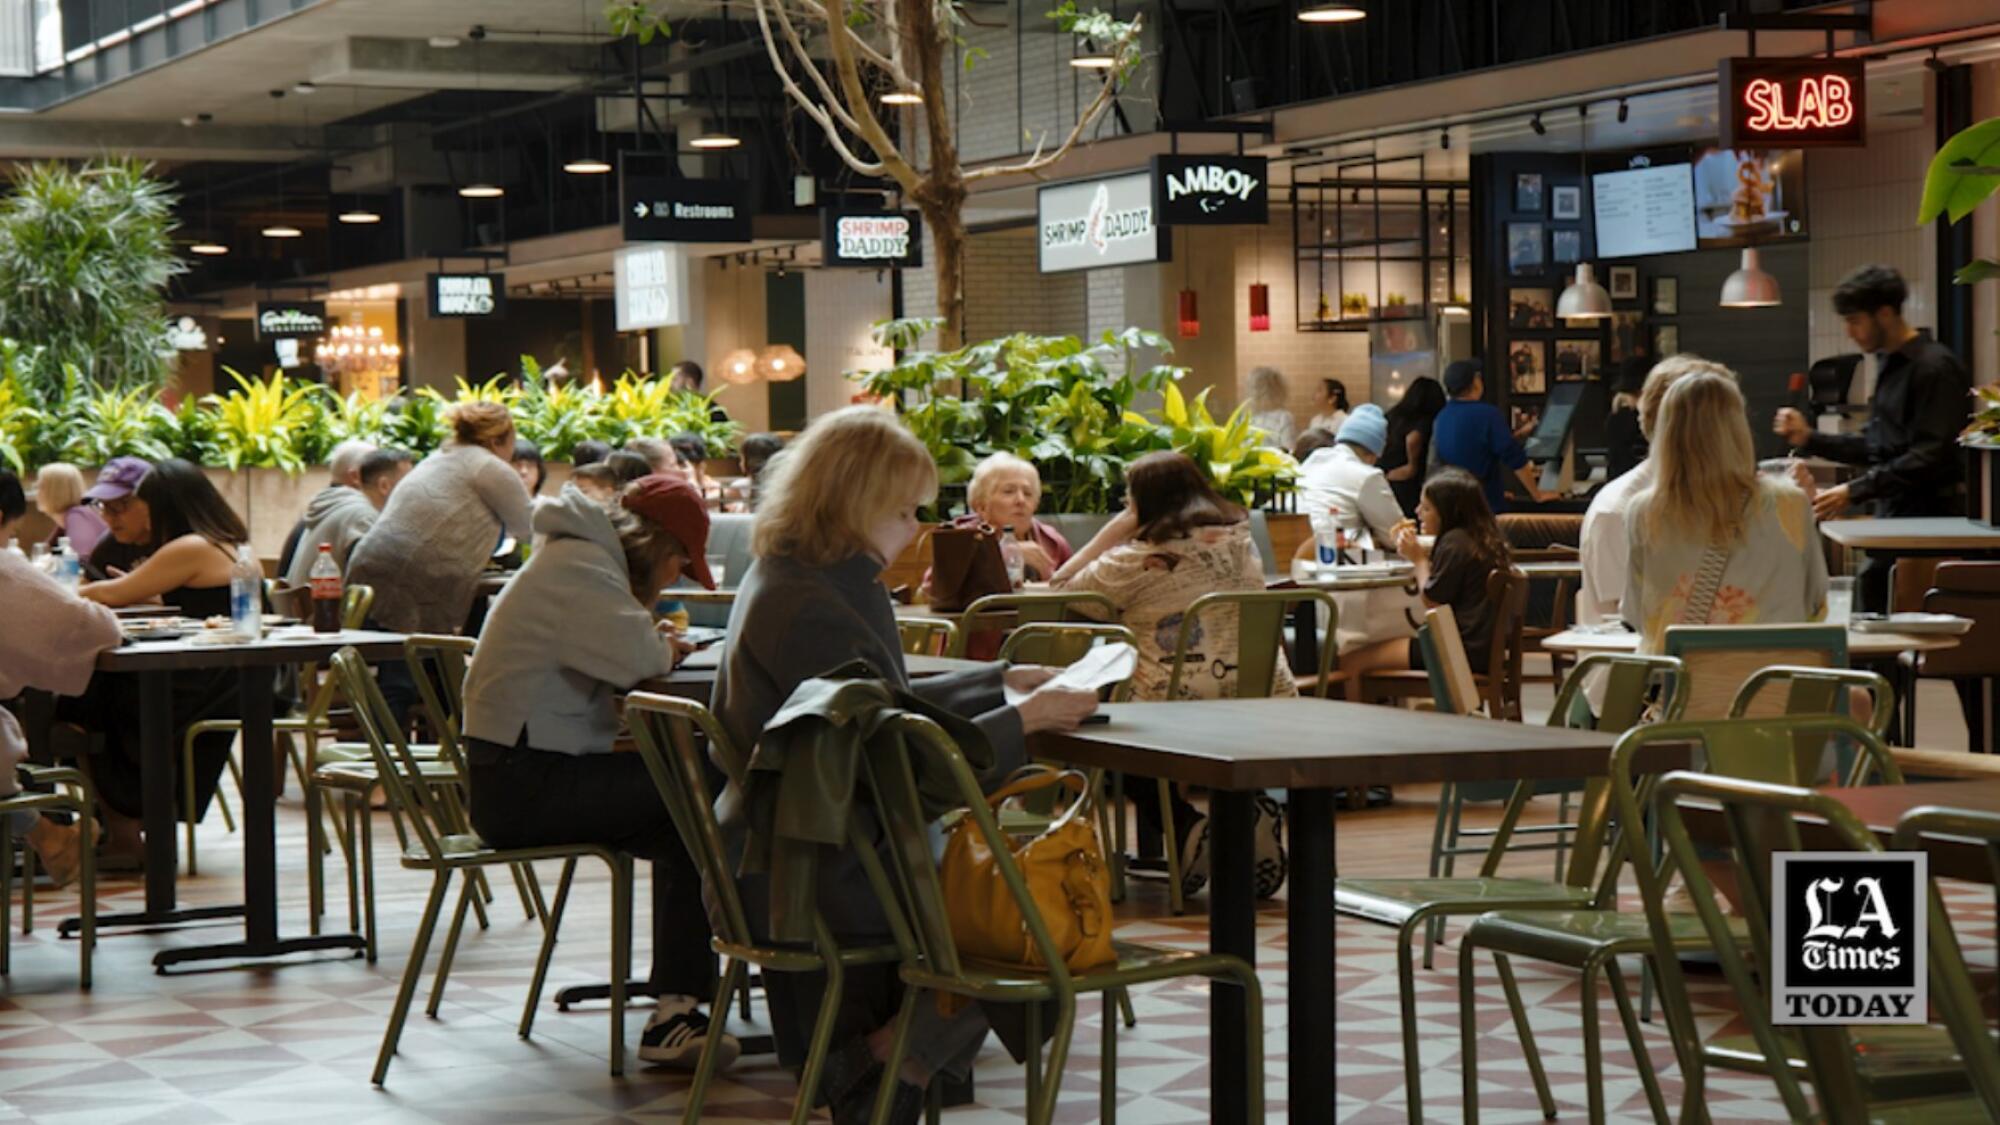 New Food Hall in the San Fernando Valley is a Revolutionary Food